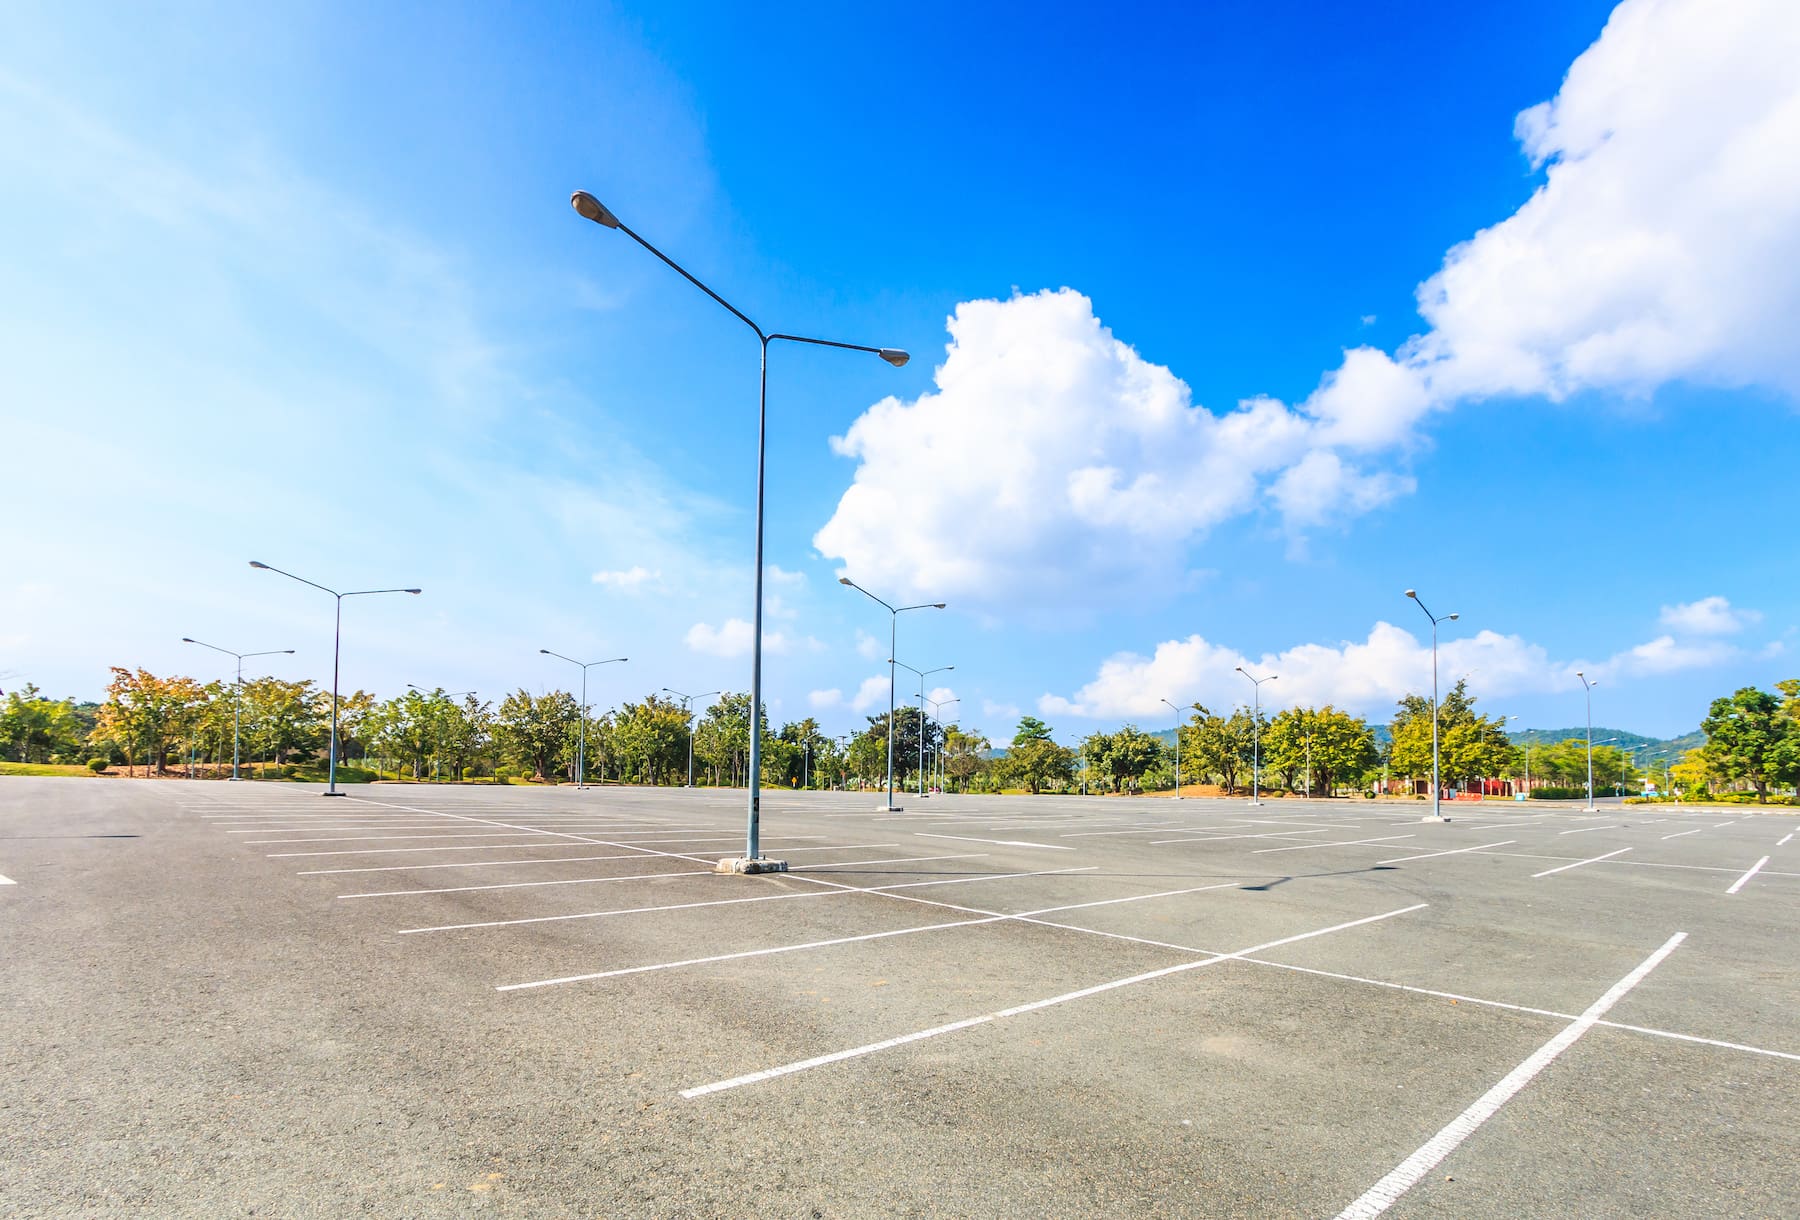 Parking Lot with Blue Sky and Clouds